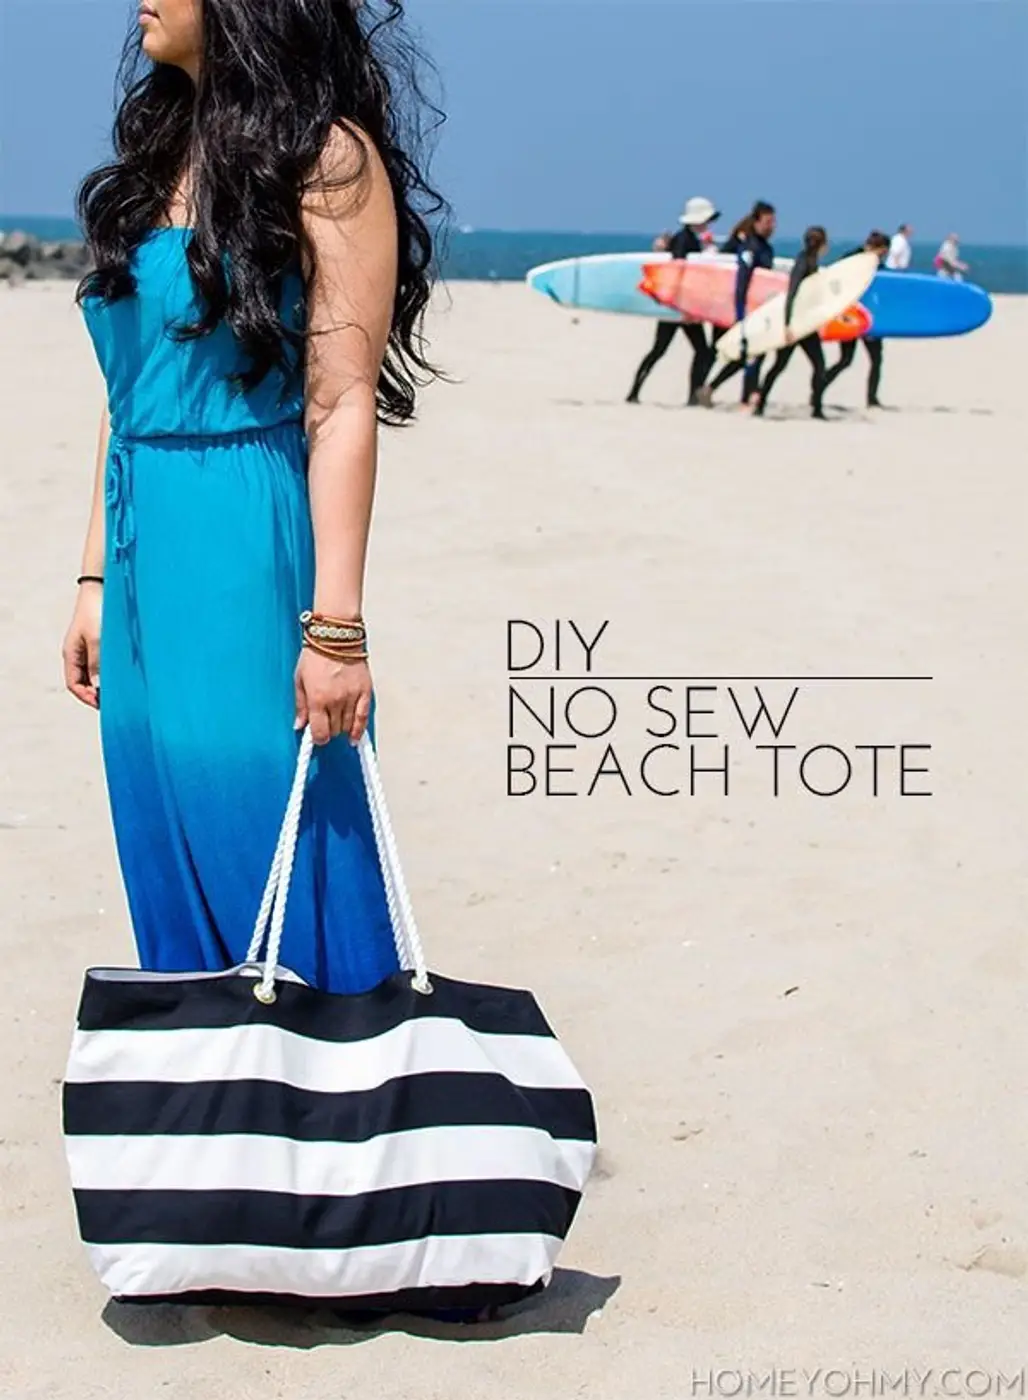 Get Ready for the Beach with This Tote